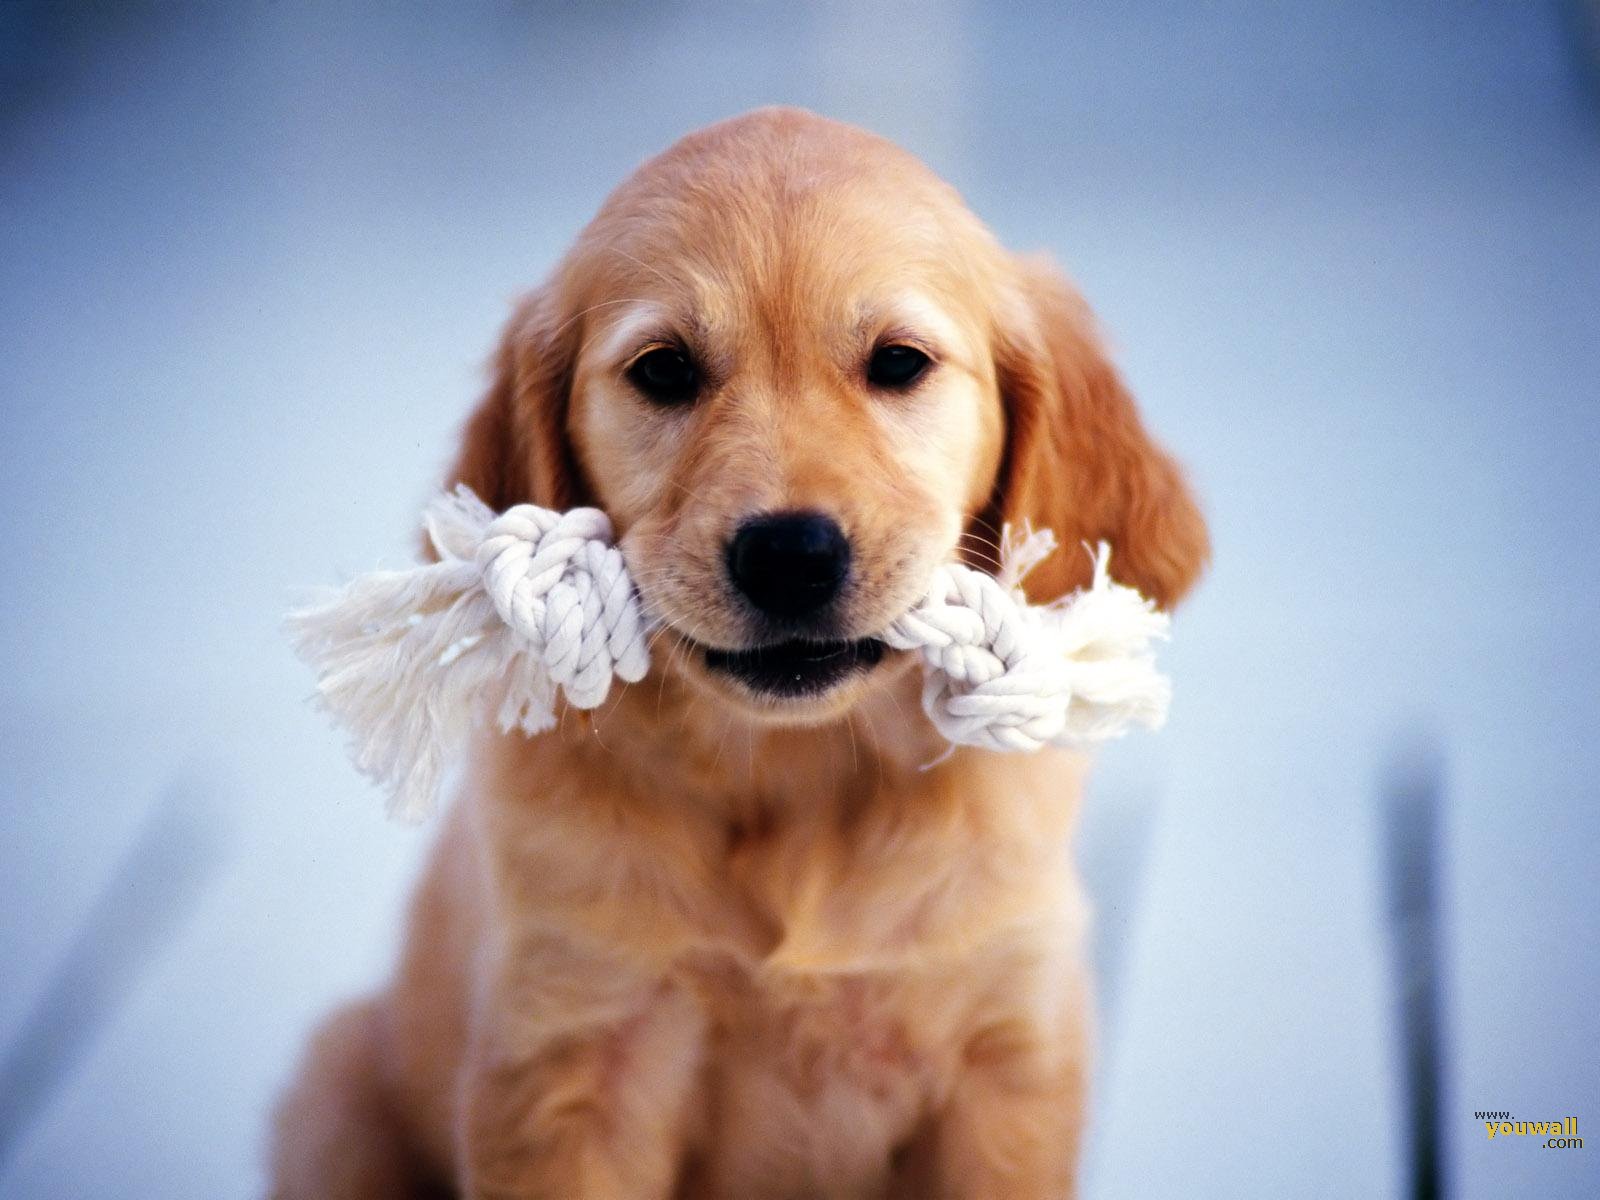 All Wallpapers Beautiful Dog Hd Wallpapers 1600x1200